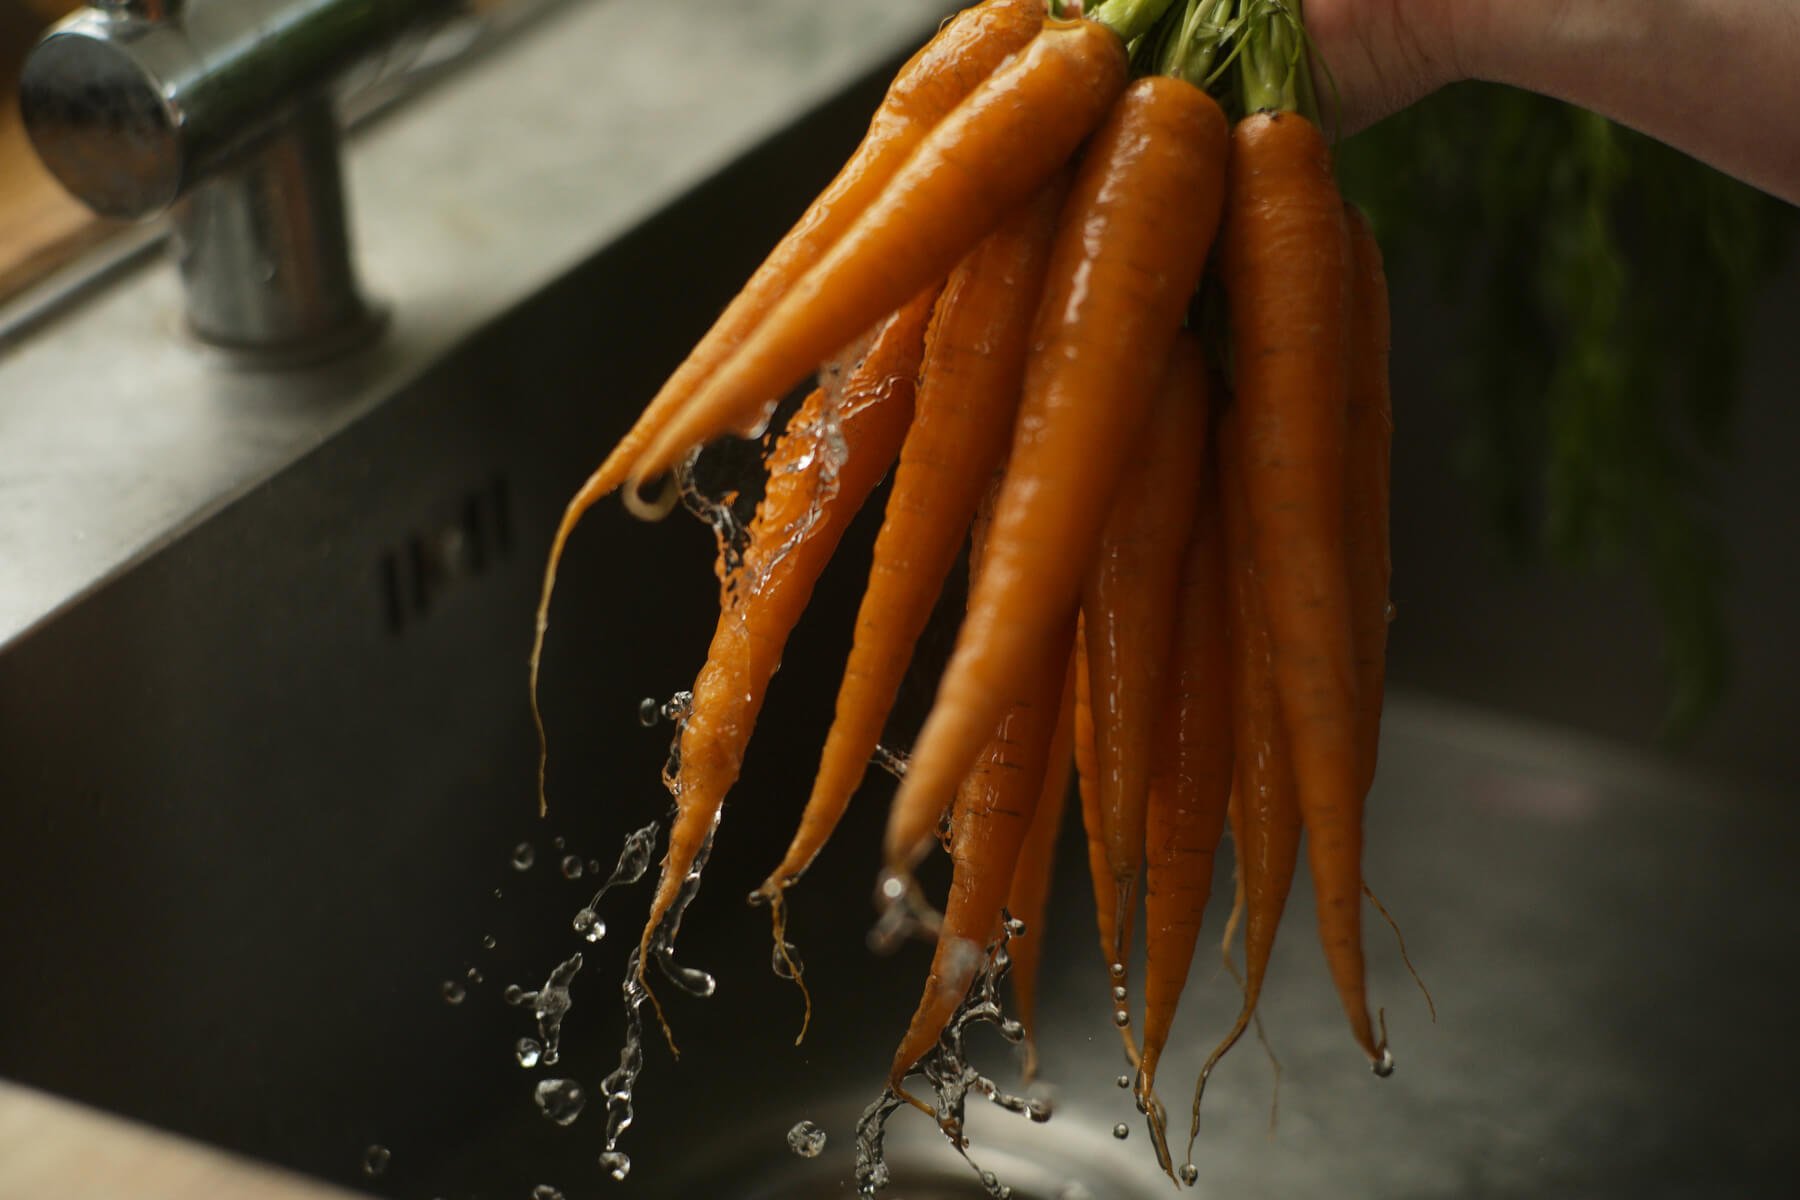 Carrots are washed under running water 1